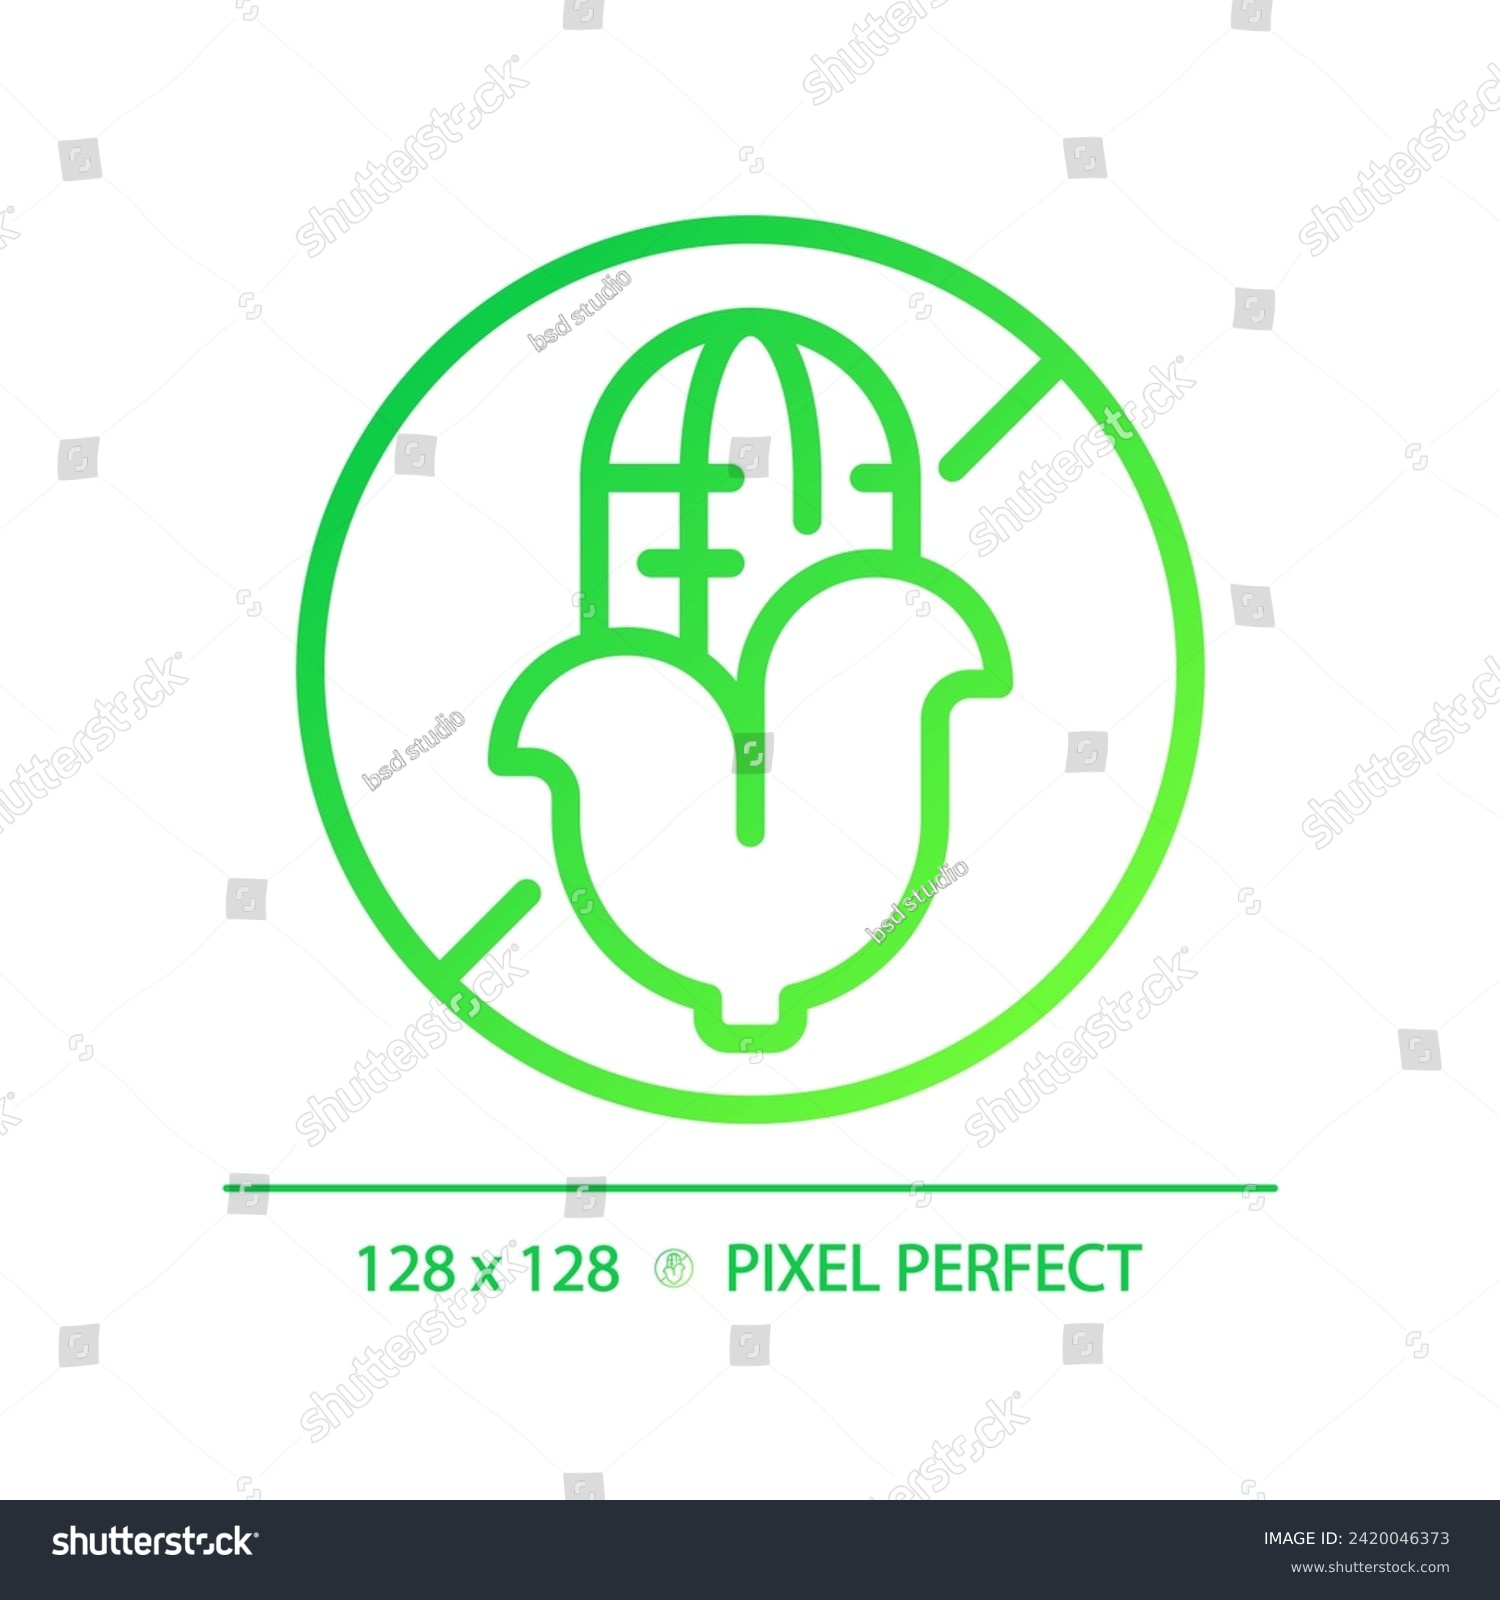 2D pixel perfect gradient corn free icon, isolated vector, thin line green illustration representing allergen free. #2420046373